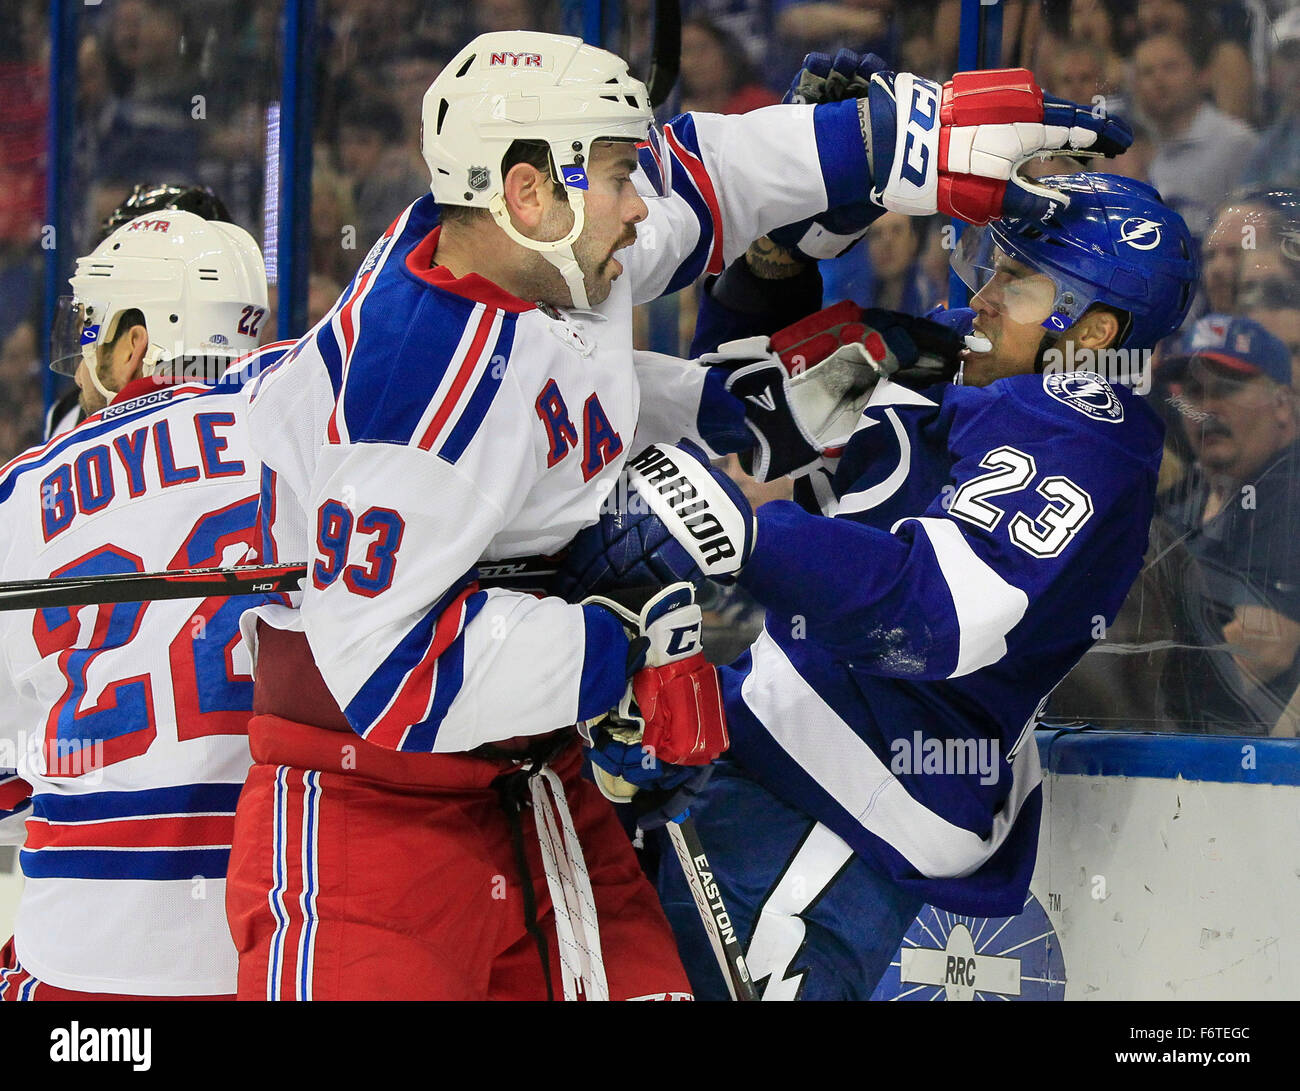 Tampa, Florida, USA. 19th Nov, 2015. DIRK SHADD | Times .Tampa Bay Lightning right wing J.T. Brown (23) gets roughed up by New York Rangers defenseman Keith Yandle (93) and defenseman Dan Boyle (22) during first period action at the Amalie Arena in Tampa Thursday evening (11/19/15). Boyle and Brown picked up roughing penalties on the play. © Dirk Shadd/Tampa Bay Times/ZUMA Wire/Alamy Live News Stock Photo